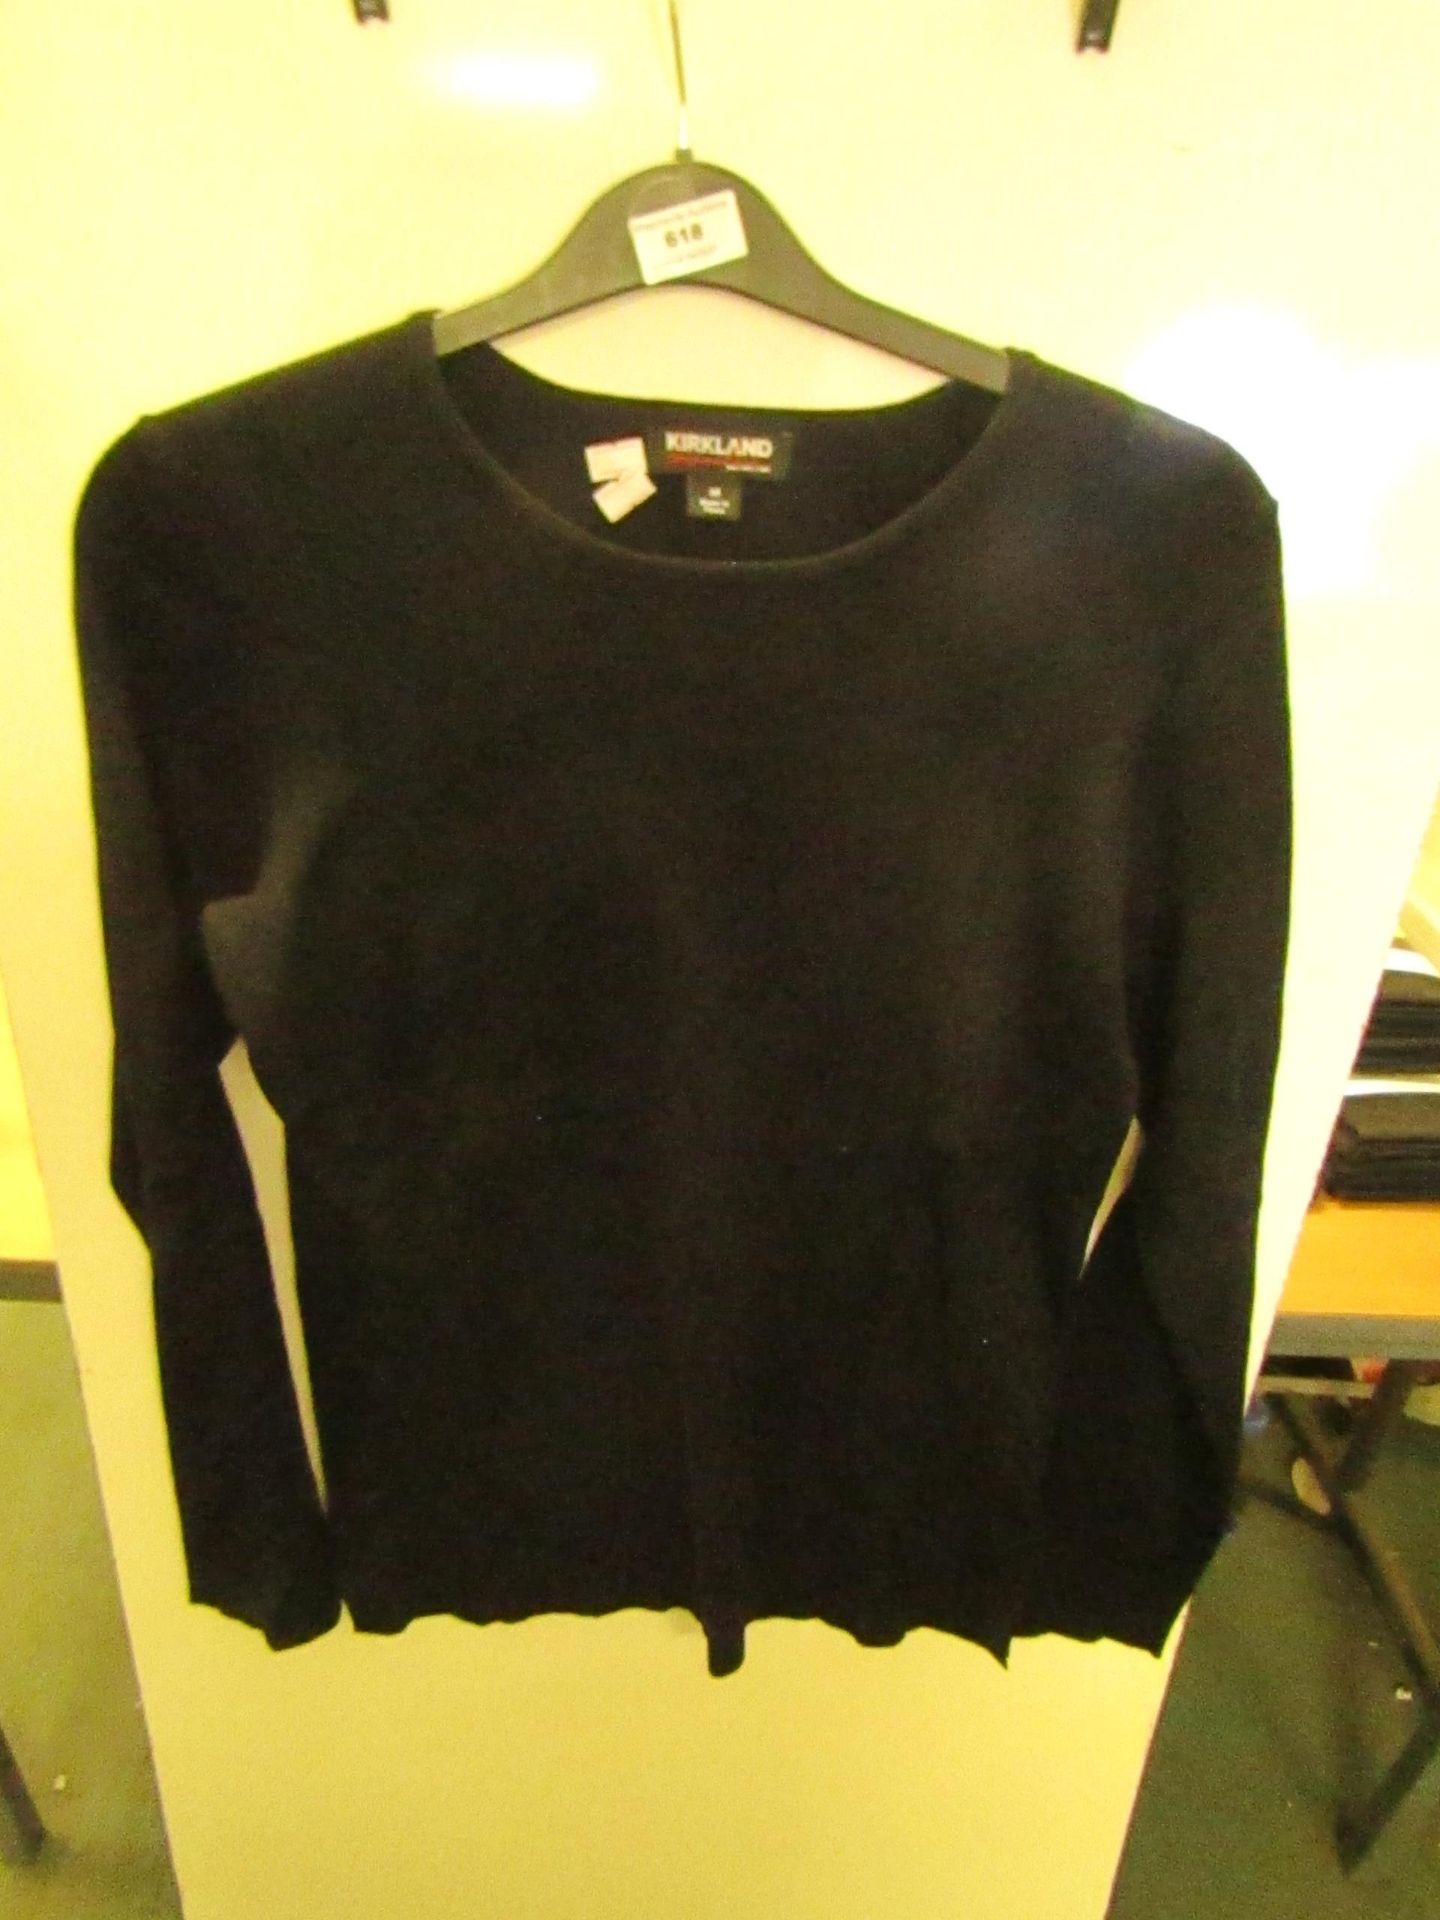 Kirkand Signature Ladies Crew Neck Sweater Black Size L New With Tags